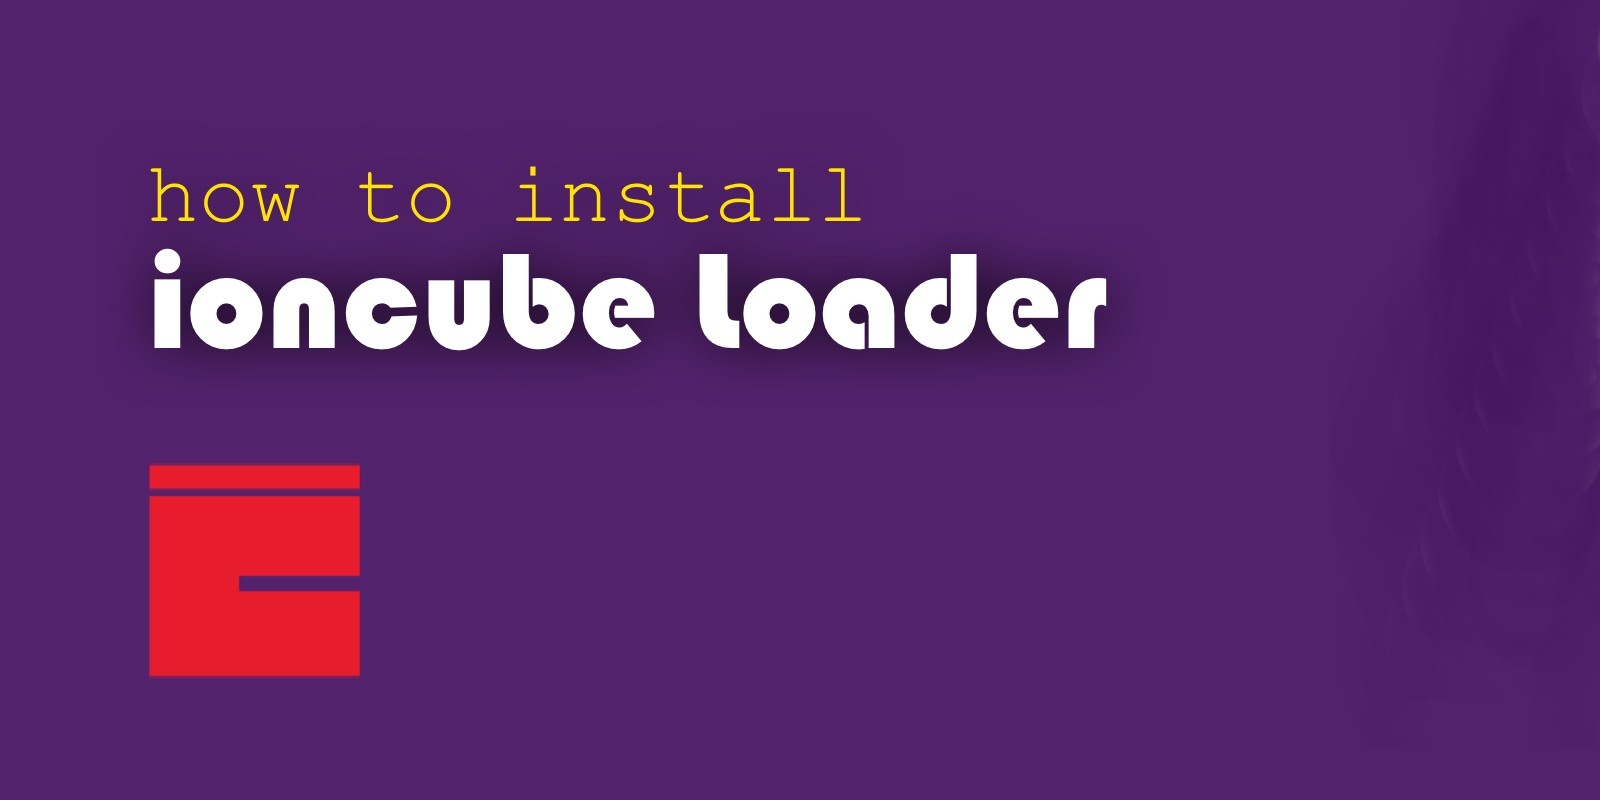 How To Install IonCube Loader on CentOS 7 ?